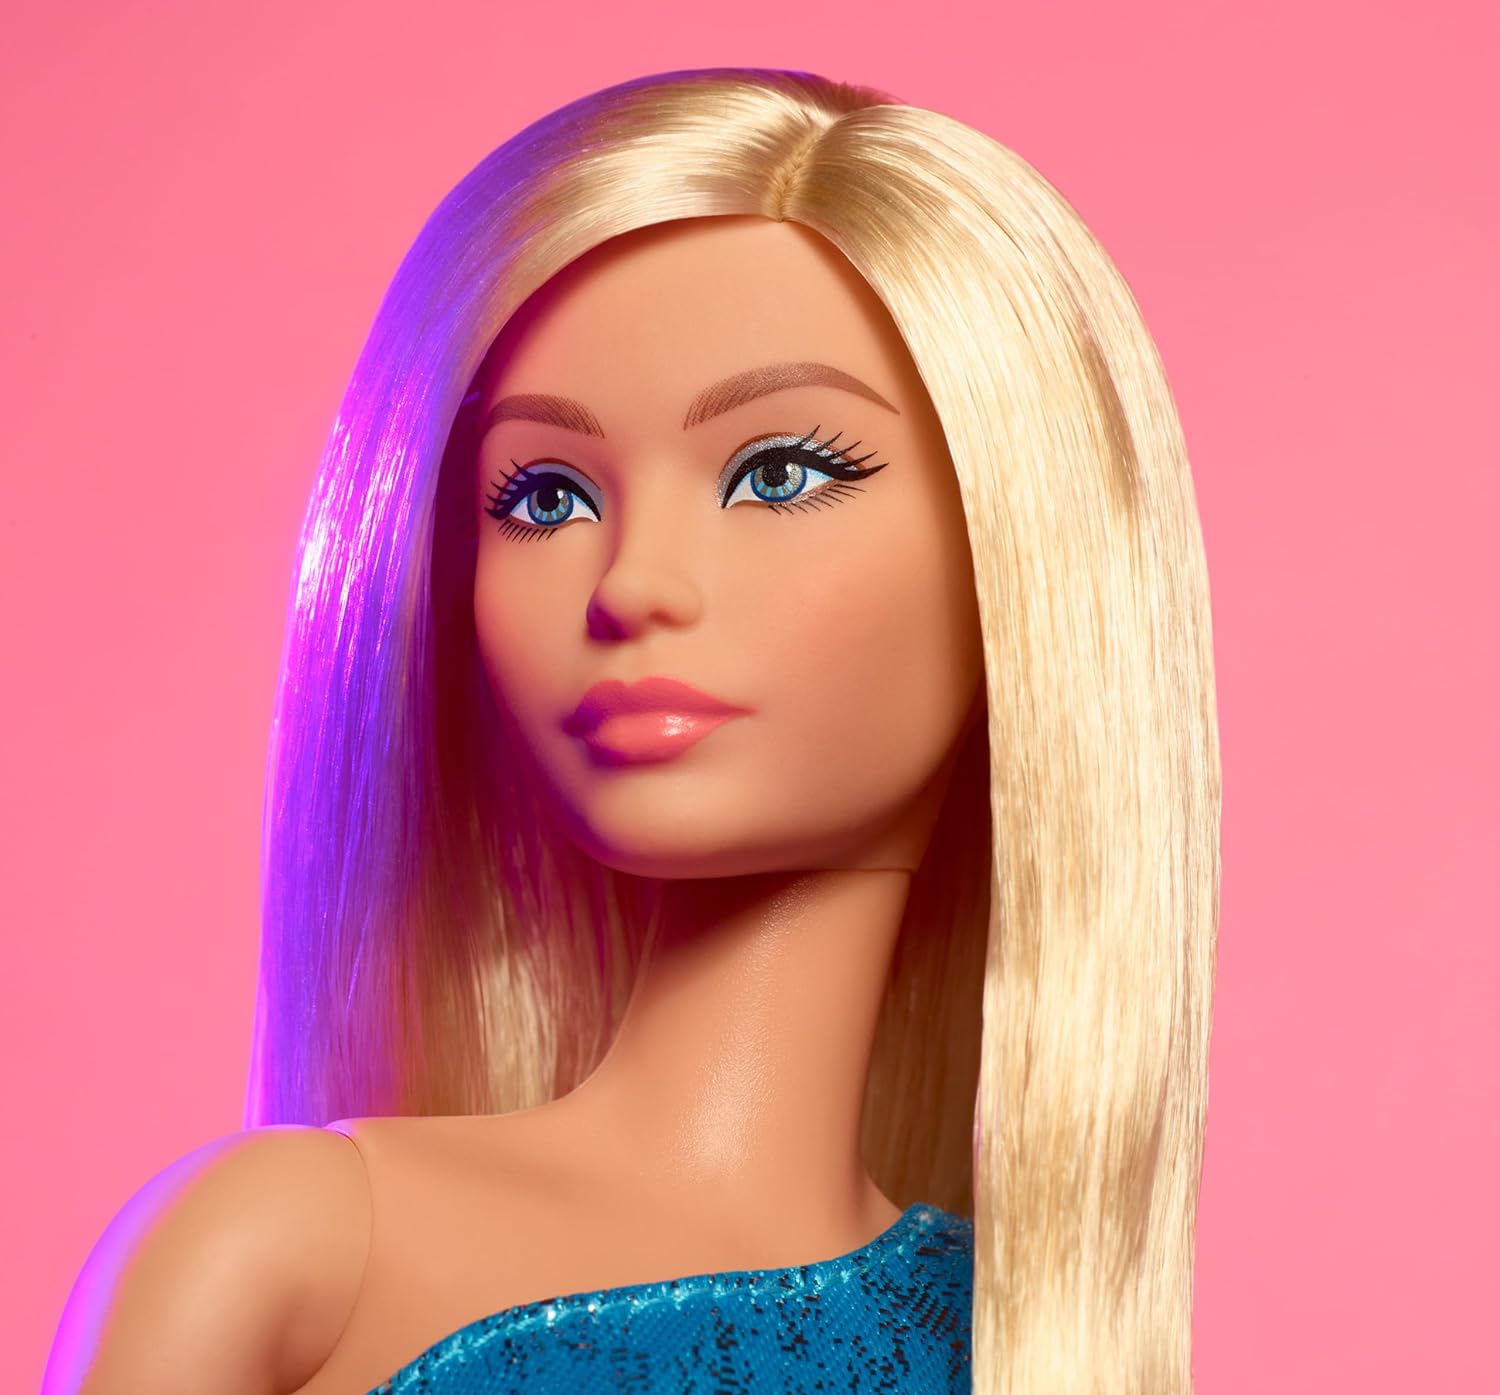 Barbie Looks Doll, Collectible No. 23 with Ash Blonde Hair and Modern Y2K Fashion, Metallic Blue One-Shoulder Dress with Strappy Heels